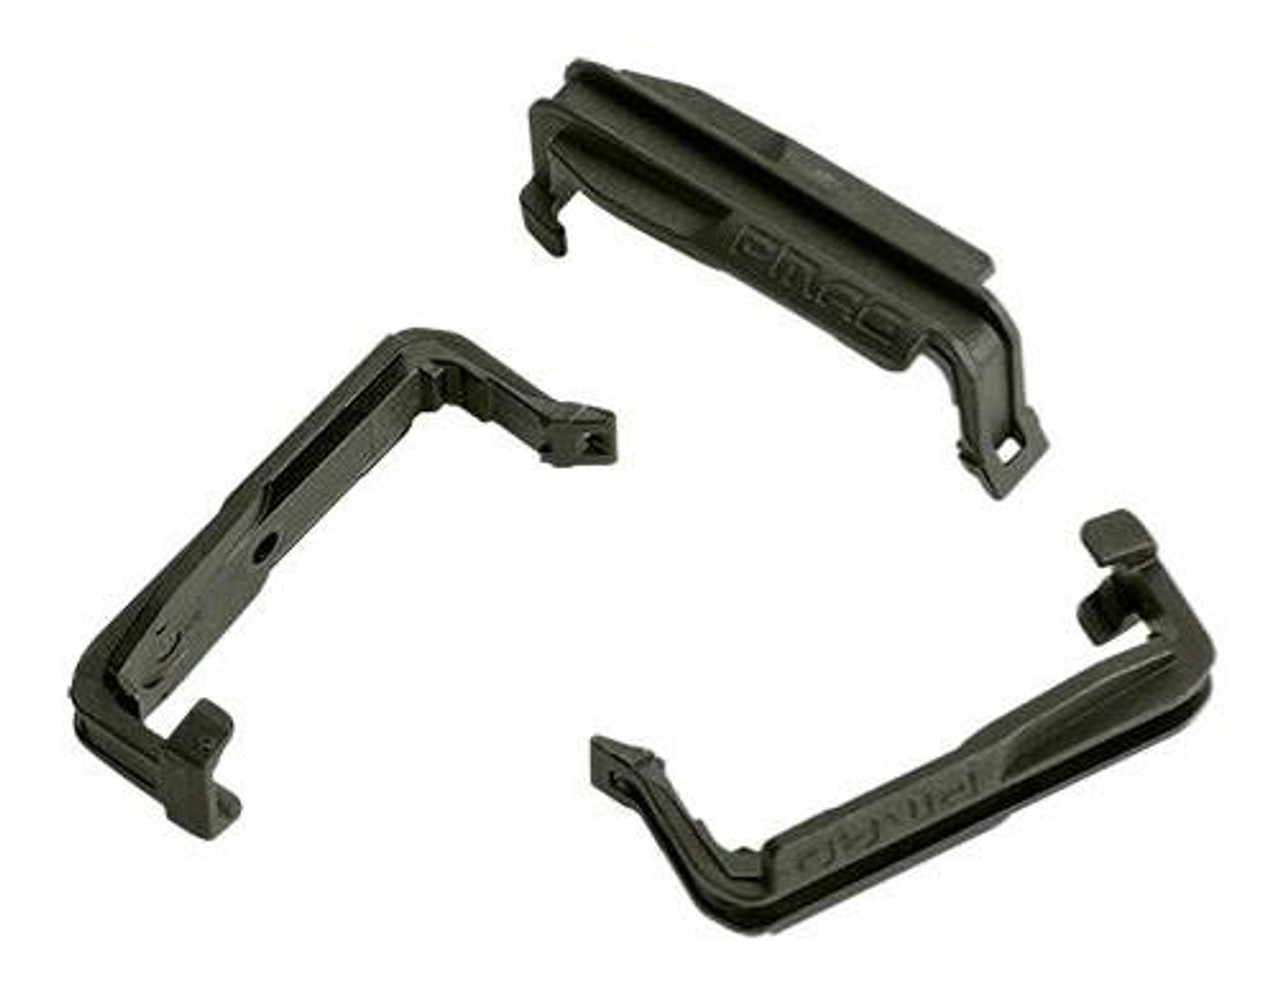 Magpul MAG216 PMAG Impact/Dust Cover for GEN M2 MOE magazines (3-Pack)